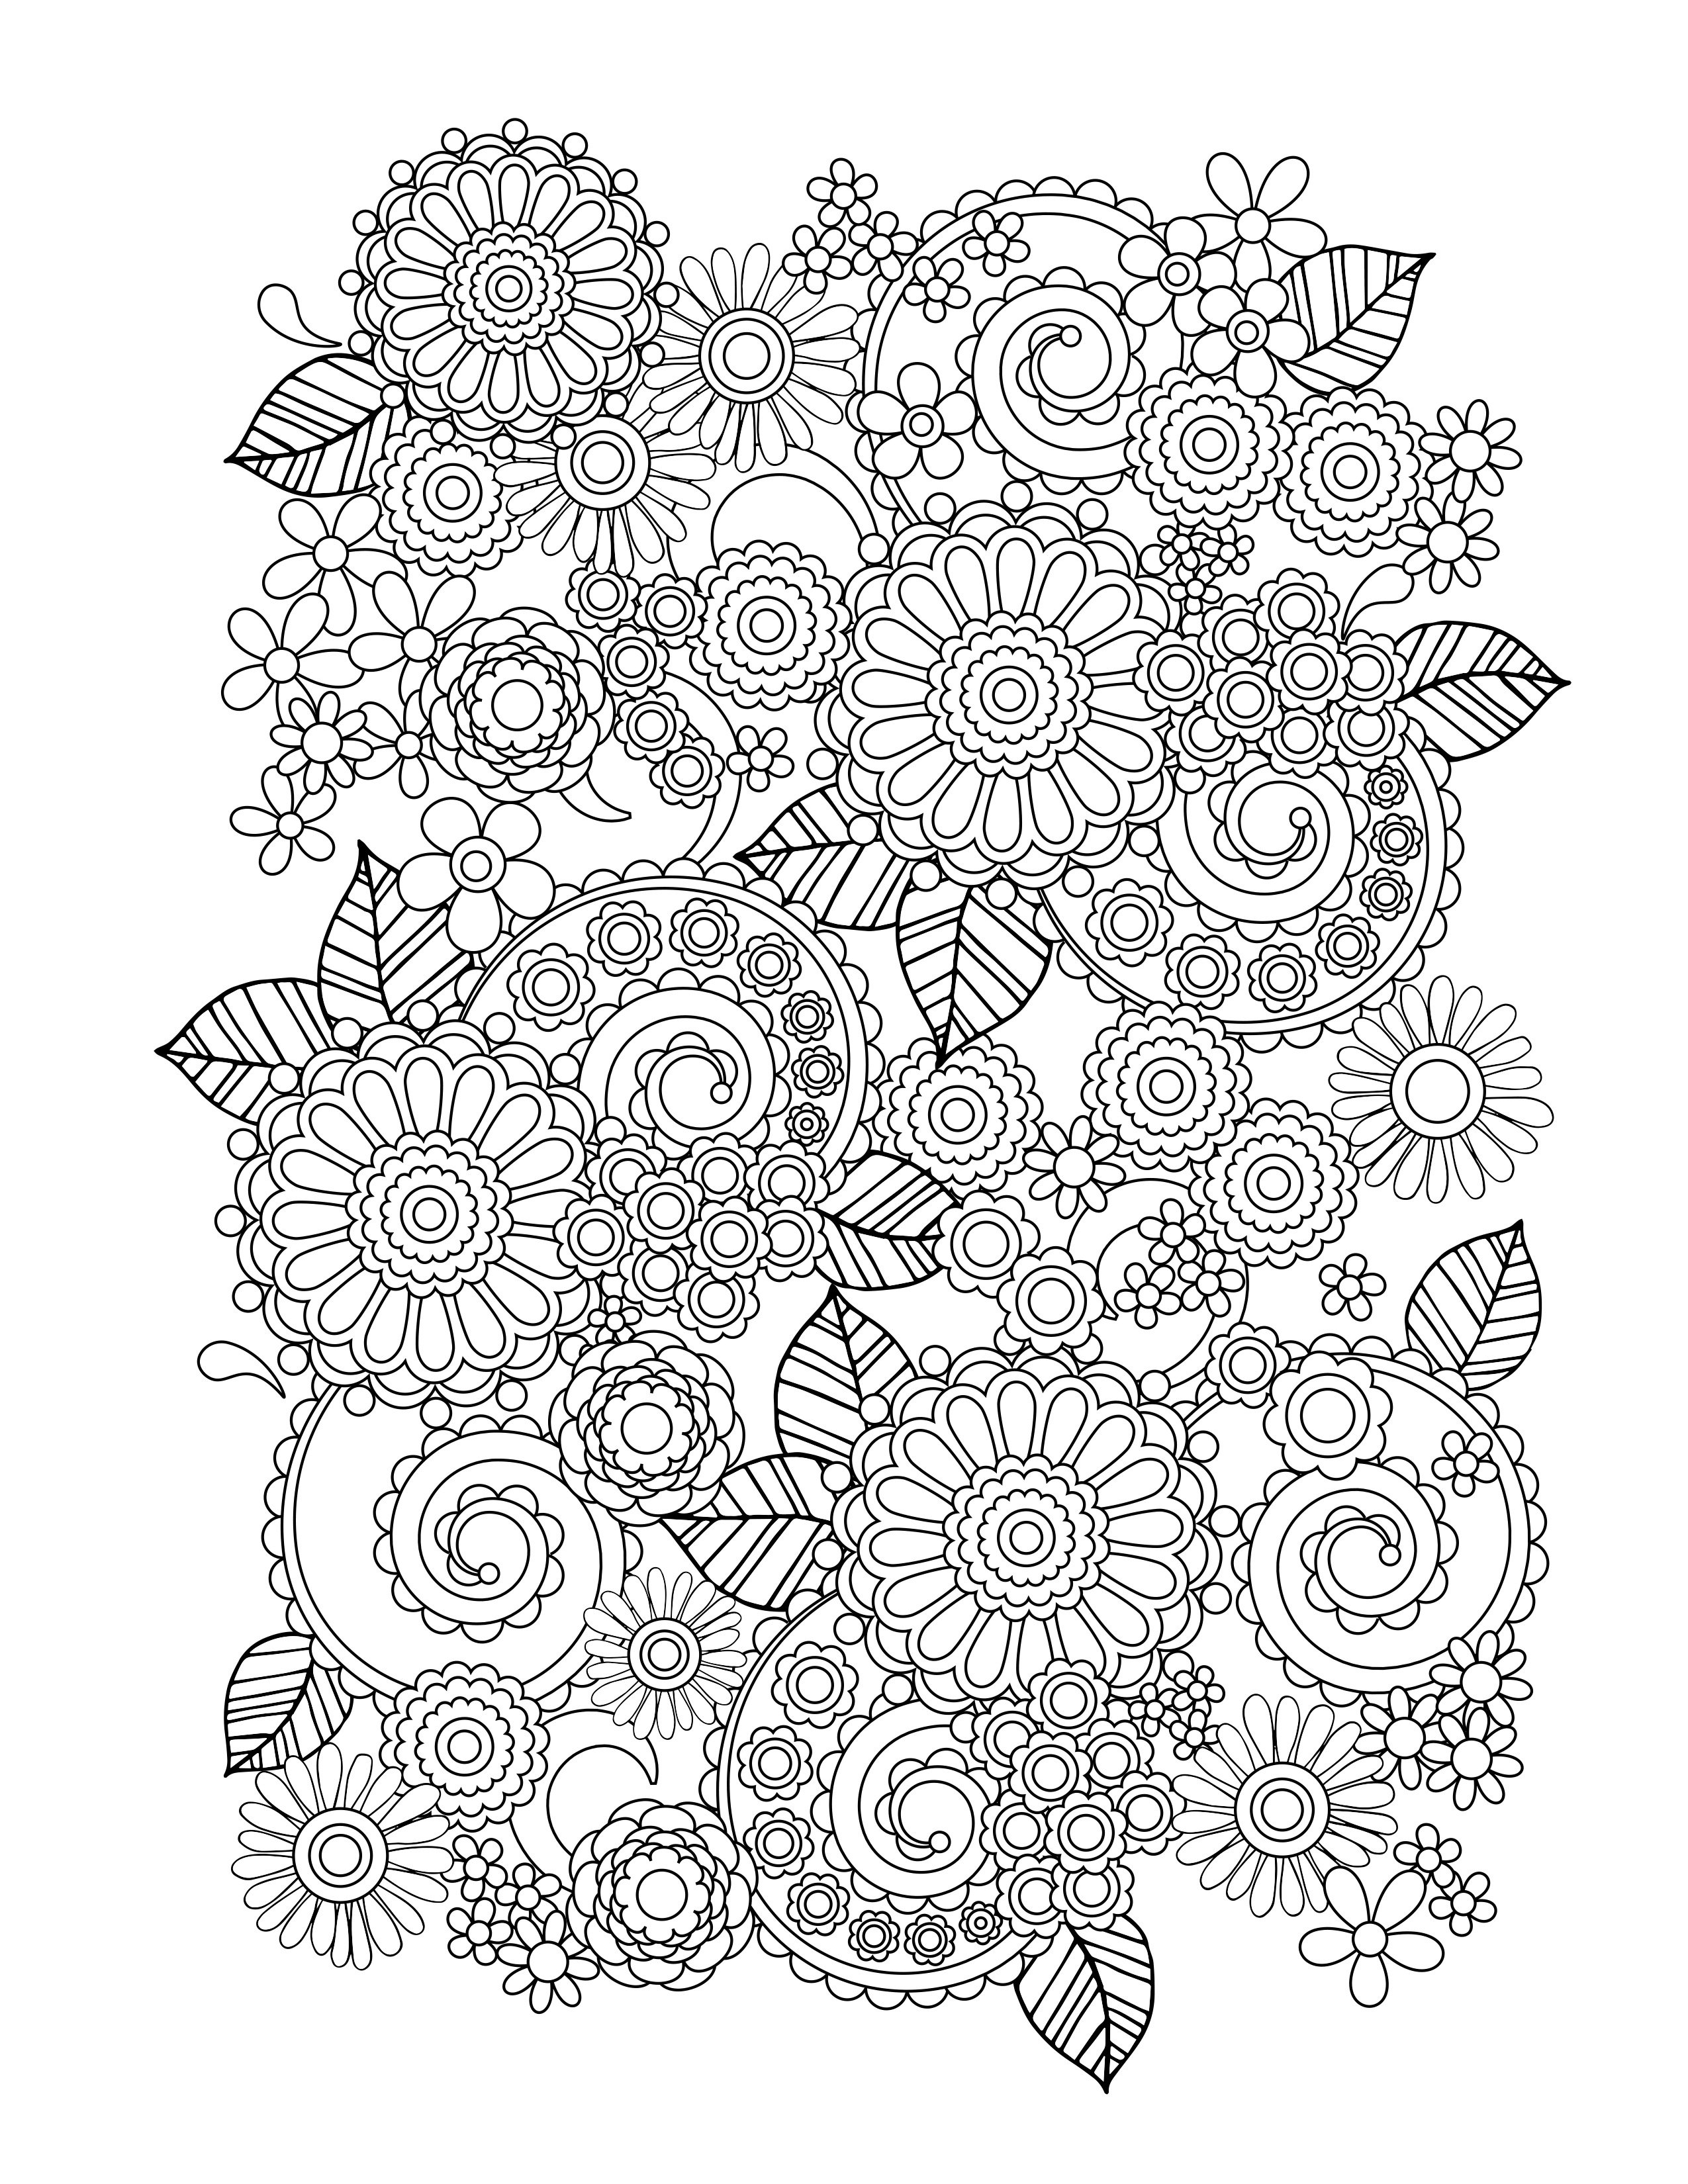 free-printable-puppies-coloring-pages-for-kids